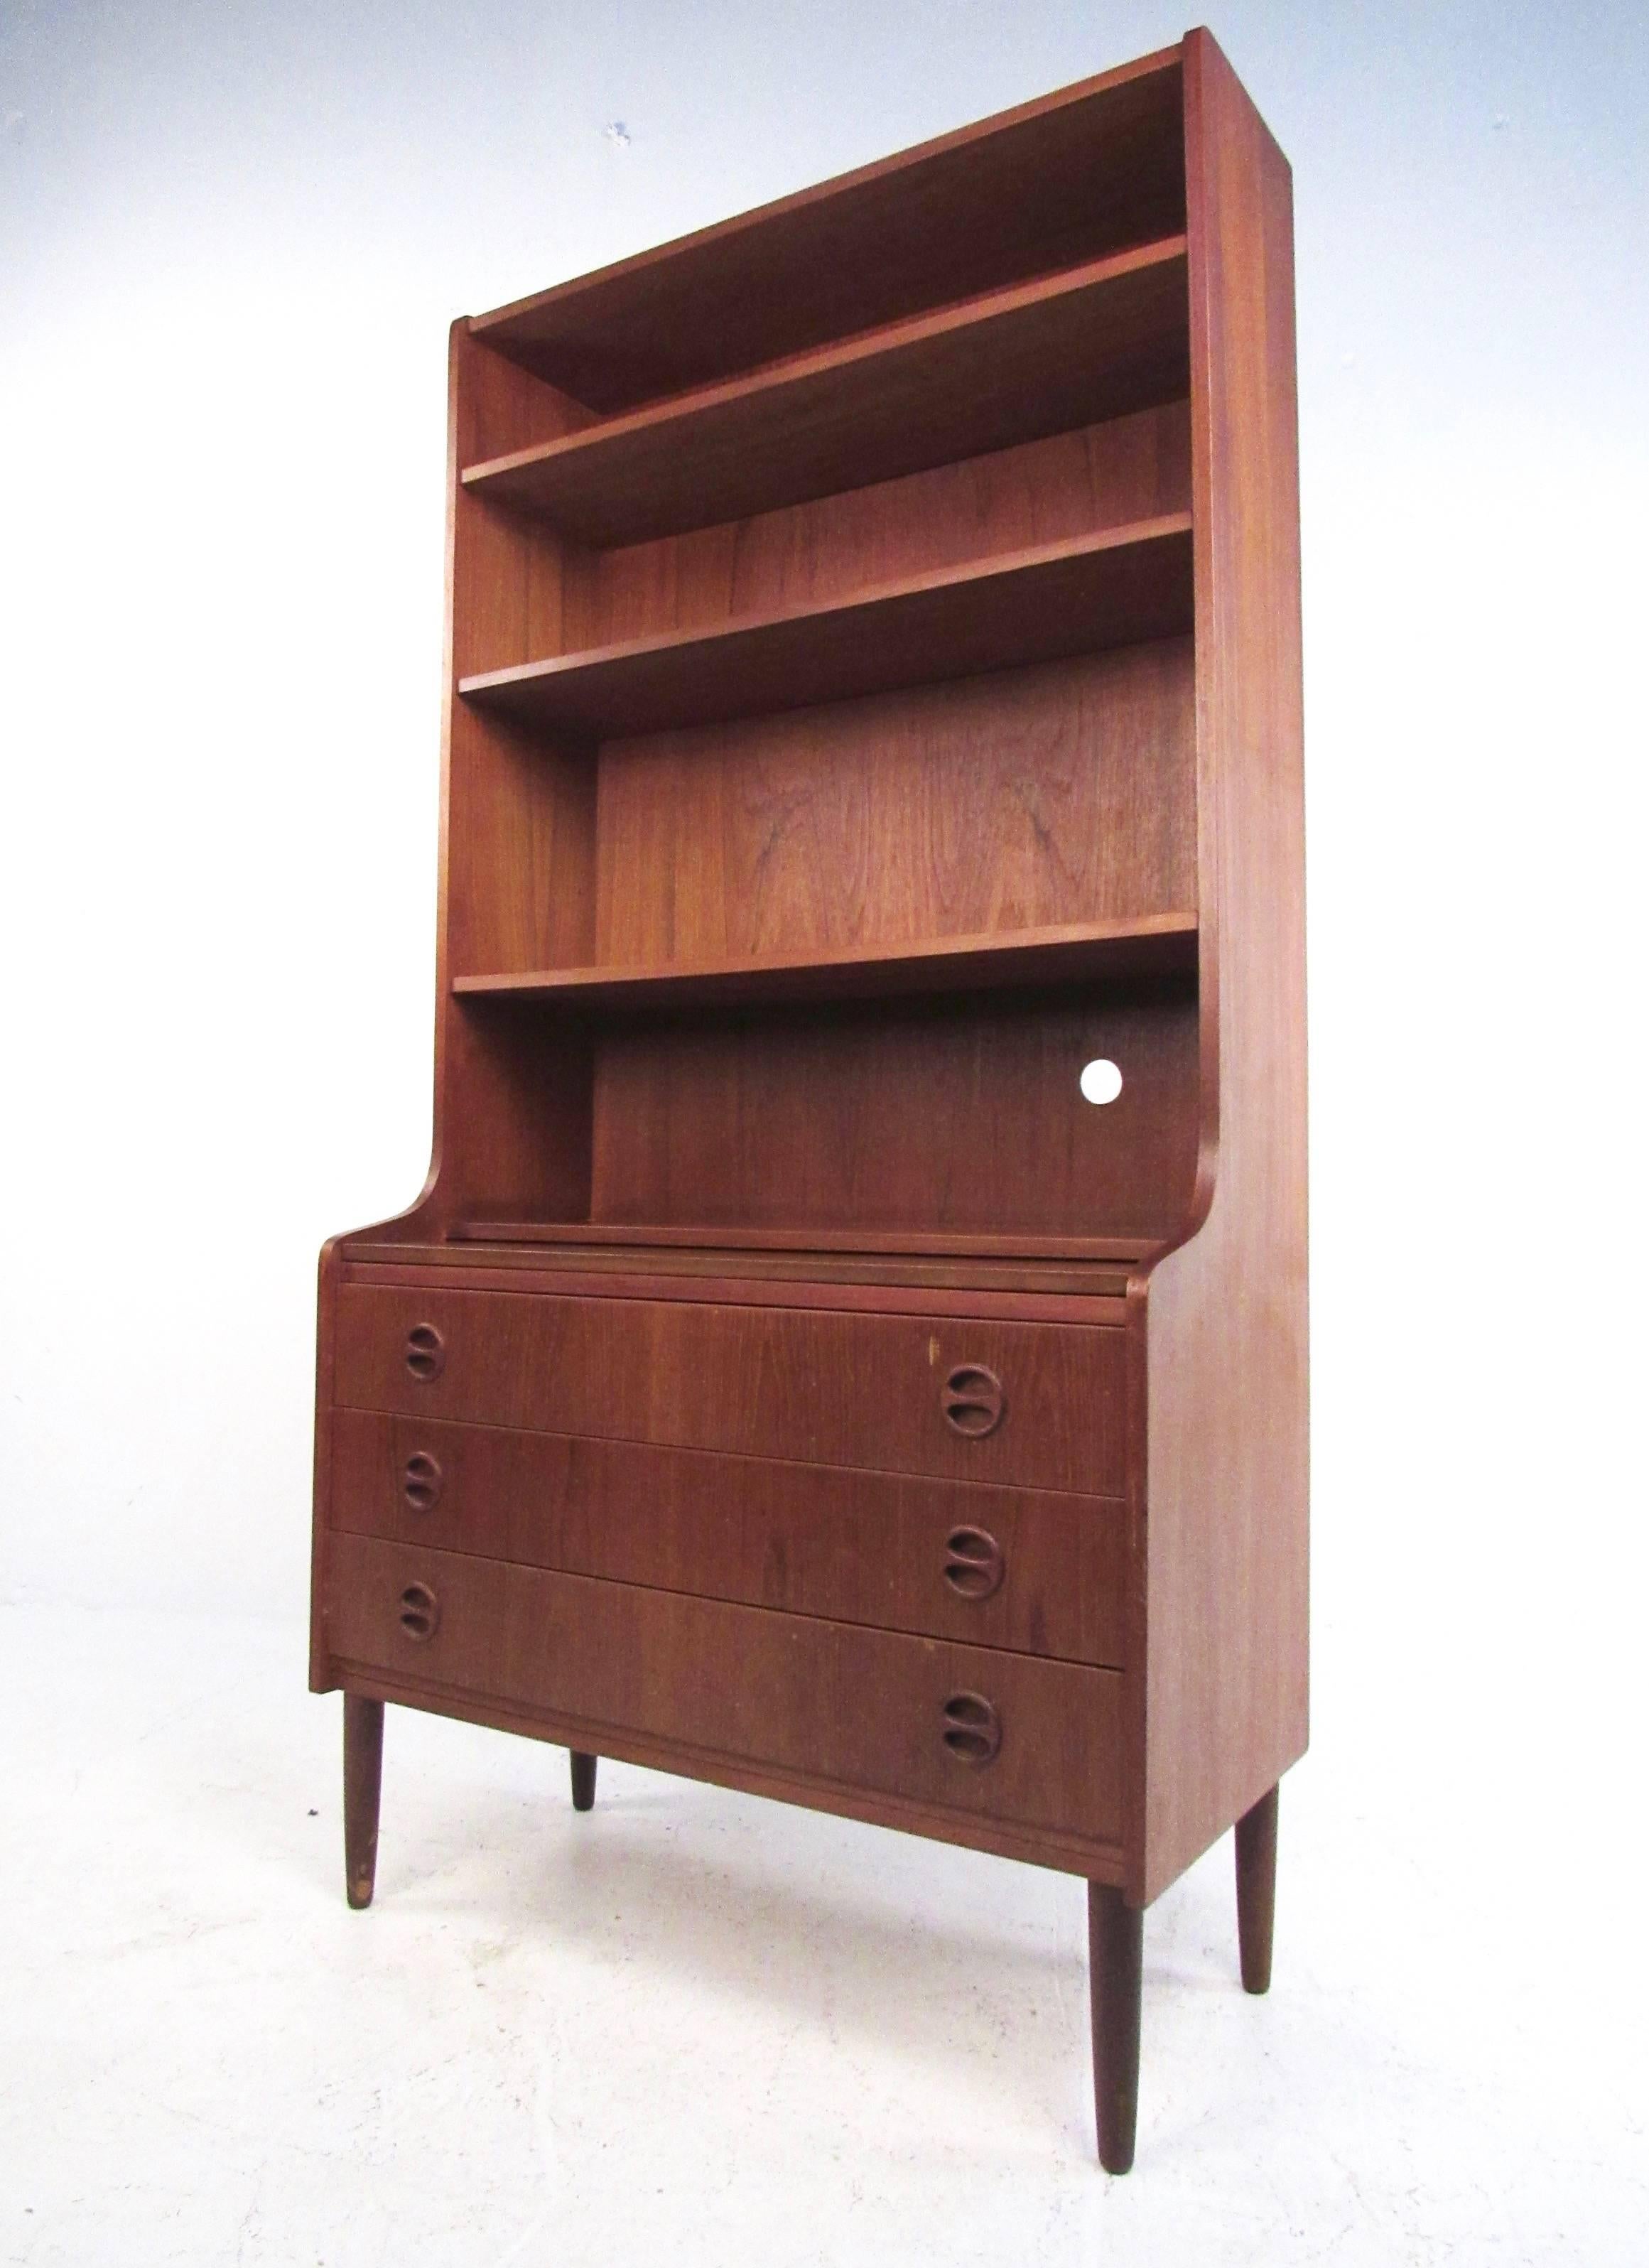 This vintage modern Danish teak shelf unit features stylish Mid-Century construction, plenty of shelf space for display, and a three-drawer cabinet for storage. Additional pull-out work space makes this a great occasional desk for a variety of